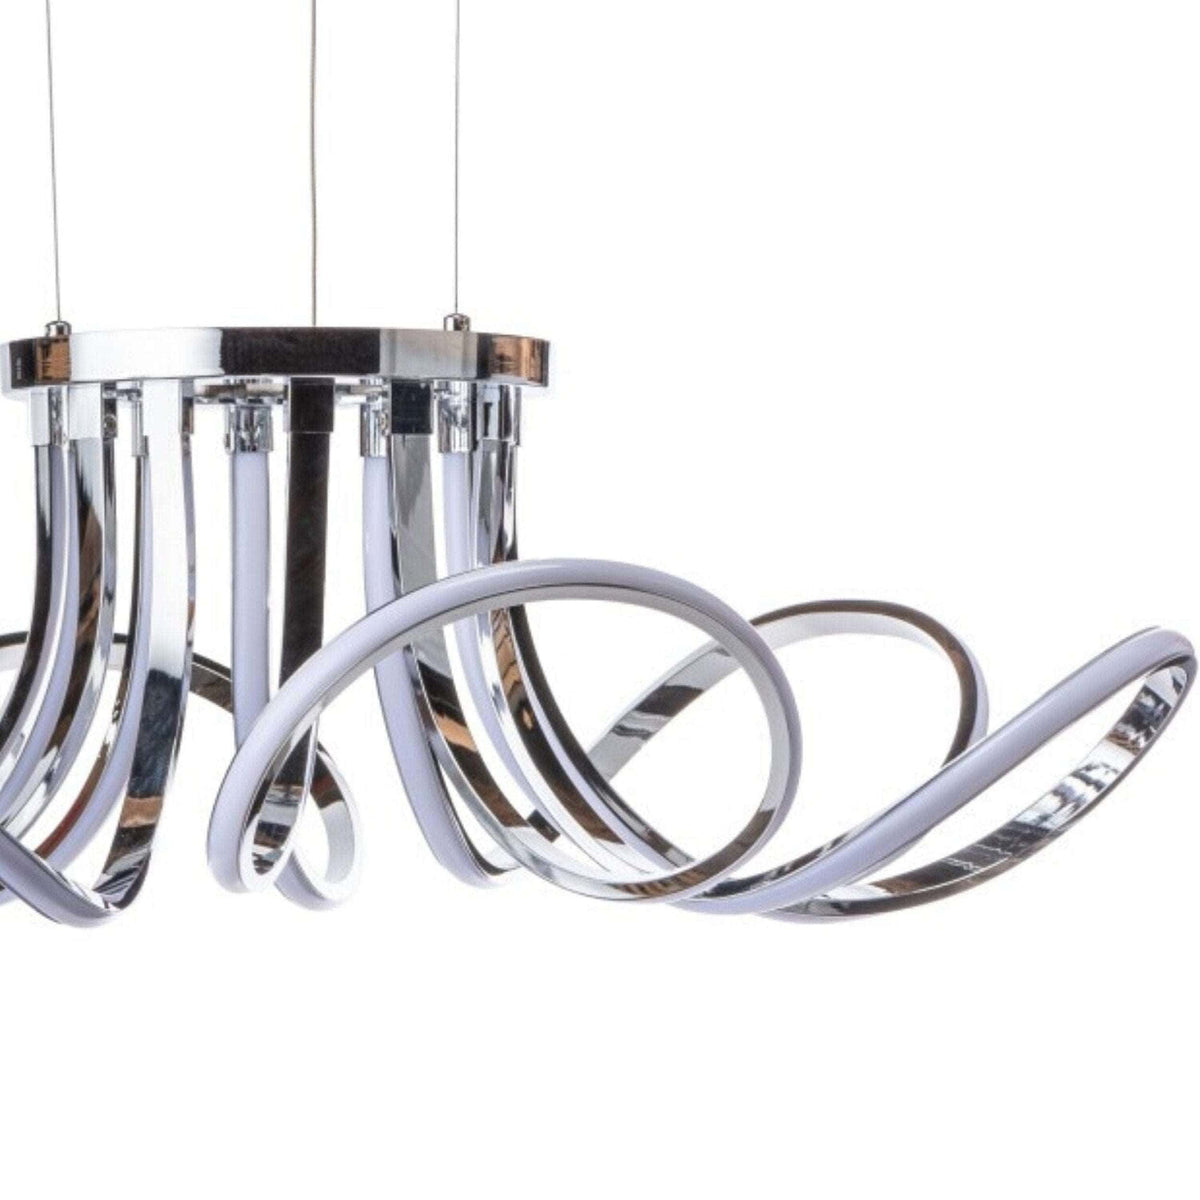 6 Petal Flower LED Strip Chandelier // Chrome and Dimmable